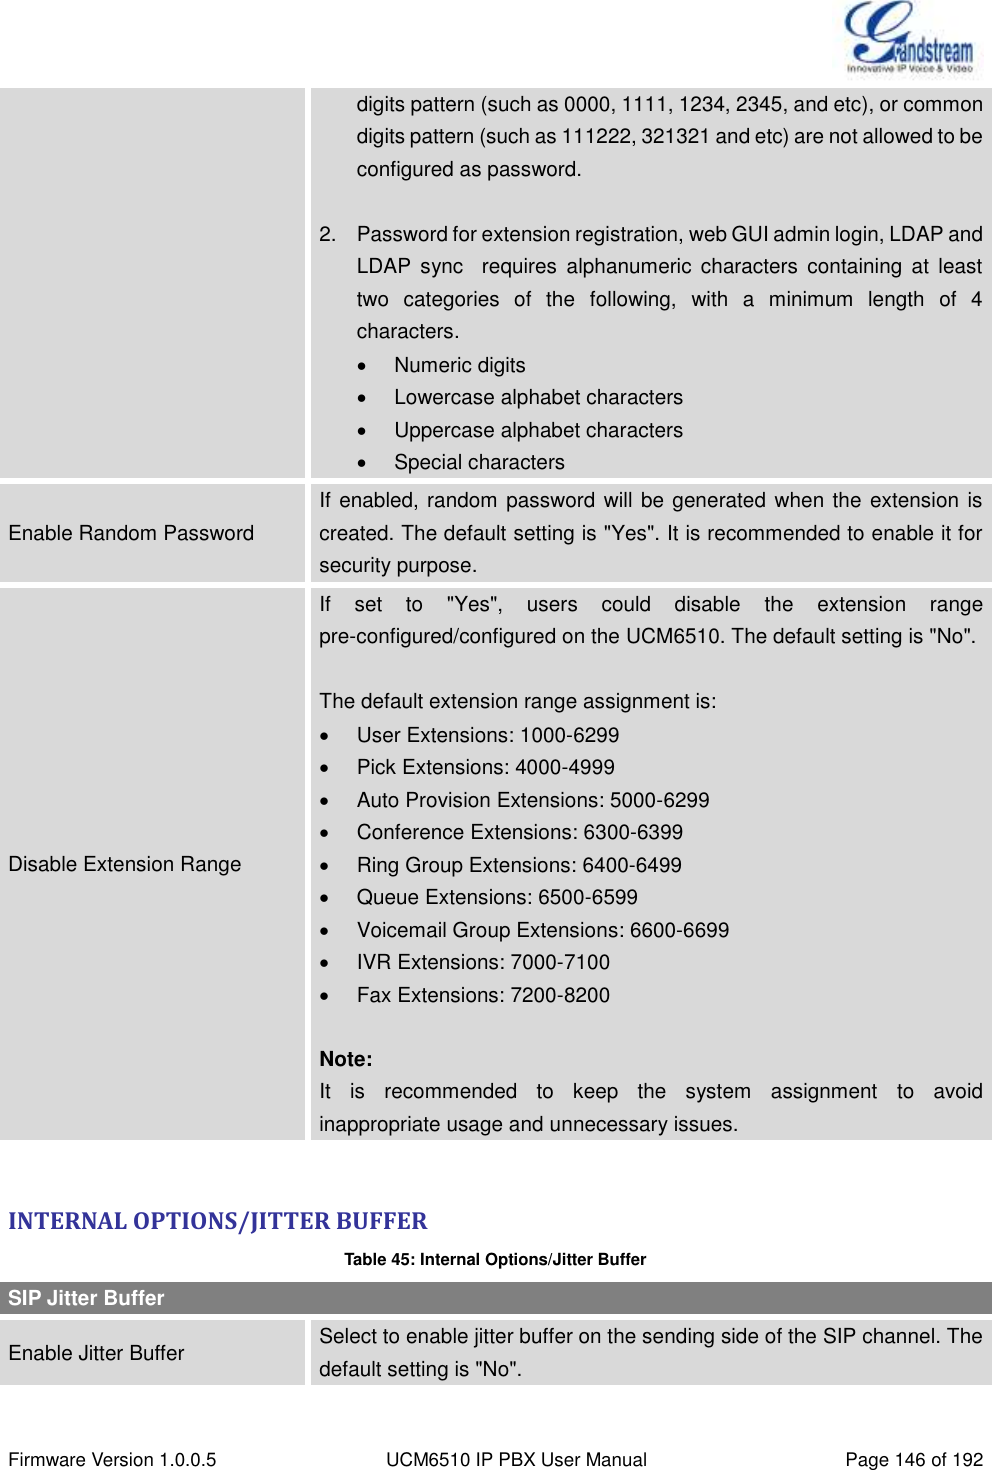  Firmware Version 1.0.0.5 UCM6510 IP PBX User Manual Page 146 of 192  digits pattern (such as 0000, 1111, 1234, 2345, and etc), or common digits pattern (such as 111222, 321321 and etc) are not allowed to be configured as password.  2.  Password for extension registration, web GUI admin login, LDAP and LDAP  sync    requires  alphanumeric  characters  containing  at  least two  categories  of  the  following,  with  a  minimum  length  of  4 characters.   Numeric digits   Lowercase alphabet characters   Uppercase alphabet characters   Special characters Enable Random Password If enabled, random password will be generated when the extension is created. The default setting is &quot;Yes&quot;. It is recommended to enable it for security purpose. Disable Extension Range If  set  to  &quot;Yes&quot;,  users  could  disable  the  extension  range pre-configured/configured on the UCM6510. The default setting is &quot;No&quot;.  The default extension range assignment is:   User Extensions: 1000-6299   Pick Extensions: 4000-4999   Auto Provision Extensions: 5000-6299   Conference Extensions: 6300-6399   Ring Group Extensions: 6400-6499   Queue Extensions: 6500-6599   Voicemail Group Extensions: 6600-6699   IVR Extensions: 7000-7100   Fax Extensions: 7200-8200  Note: It  is  recommended  to  keep  the  system  assignment  to  avoid inappropriate usage and unnecessary issues.  INTERNAL OPTIONS/JITTER BUFFER Table 45: Internal Options/Jitter Buffer SIP Jitter Buffer Enable Jitter Buffer Select to enable jitter buffer on the sending side of the SIP channel. The default setting is &quot;No&quot;. 